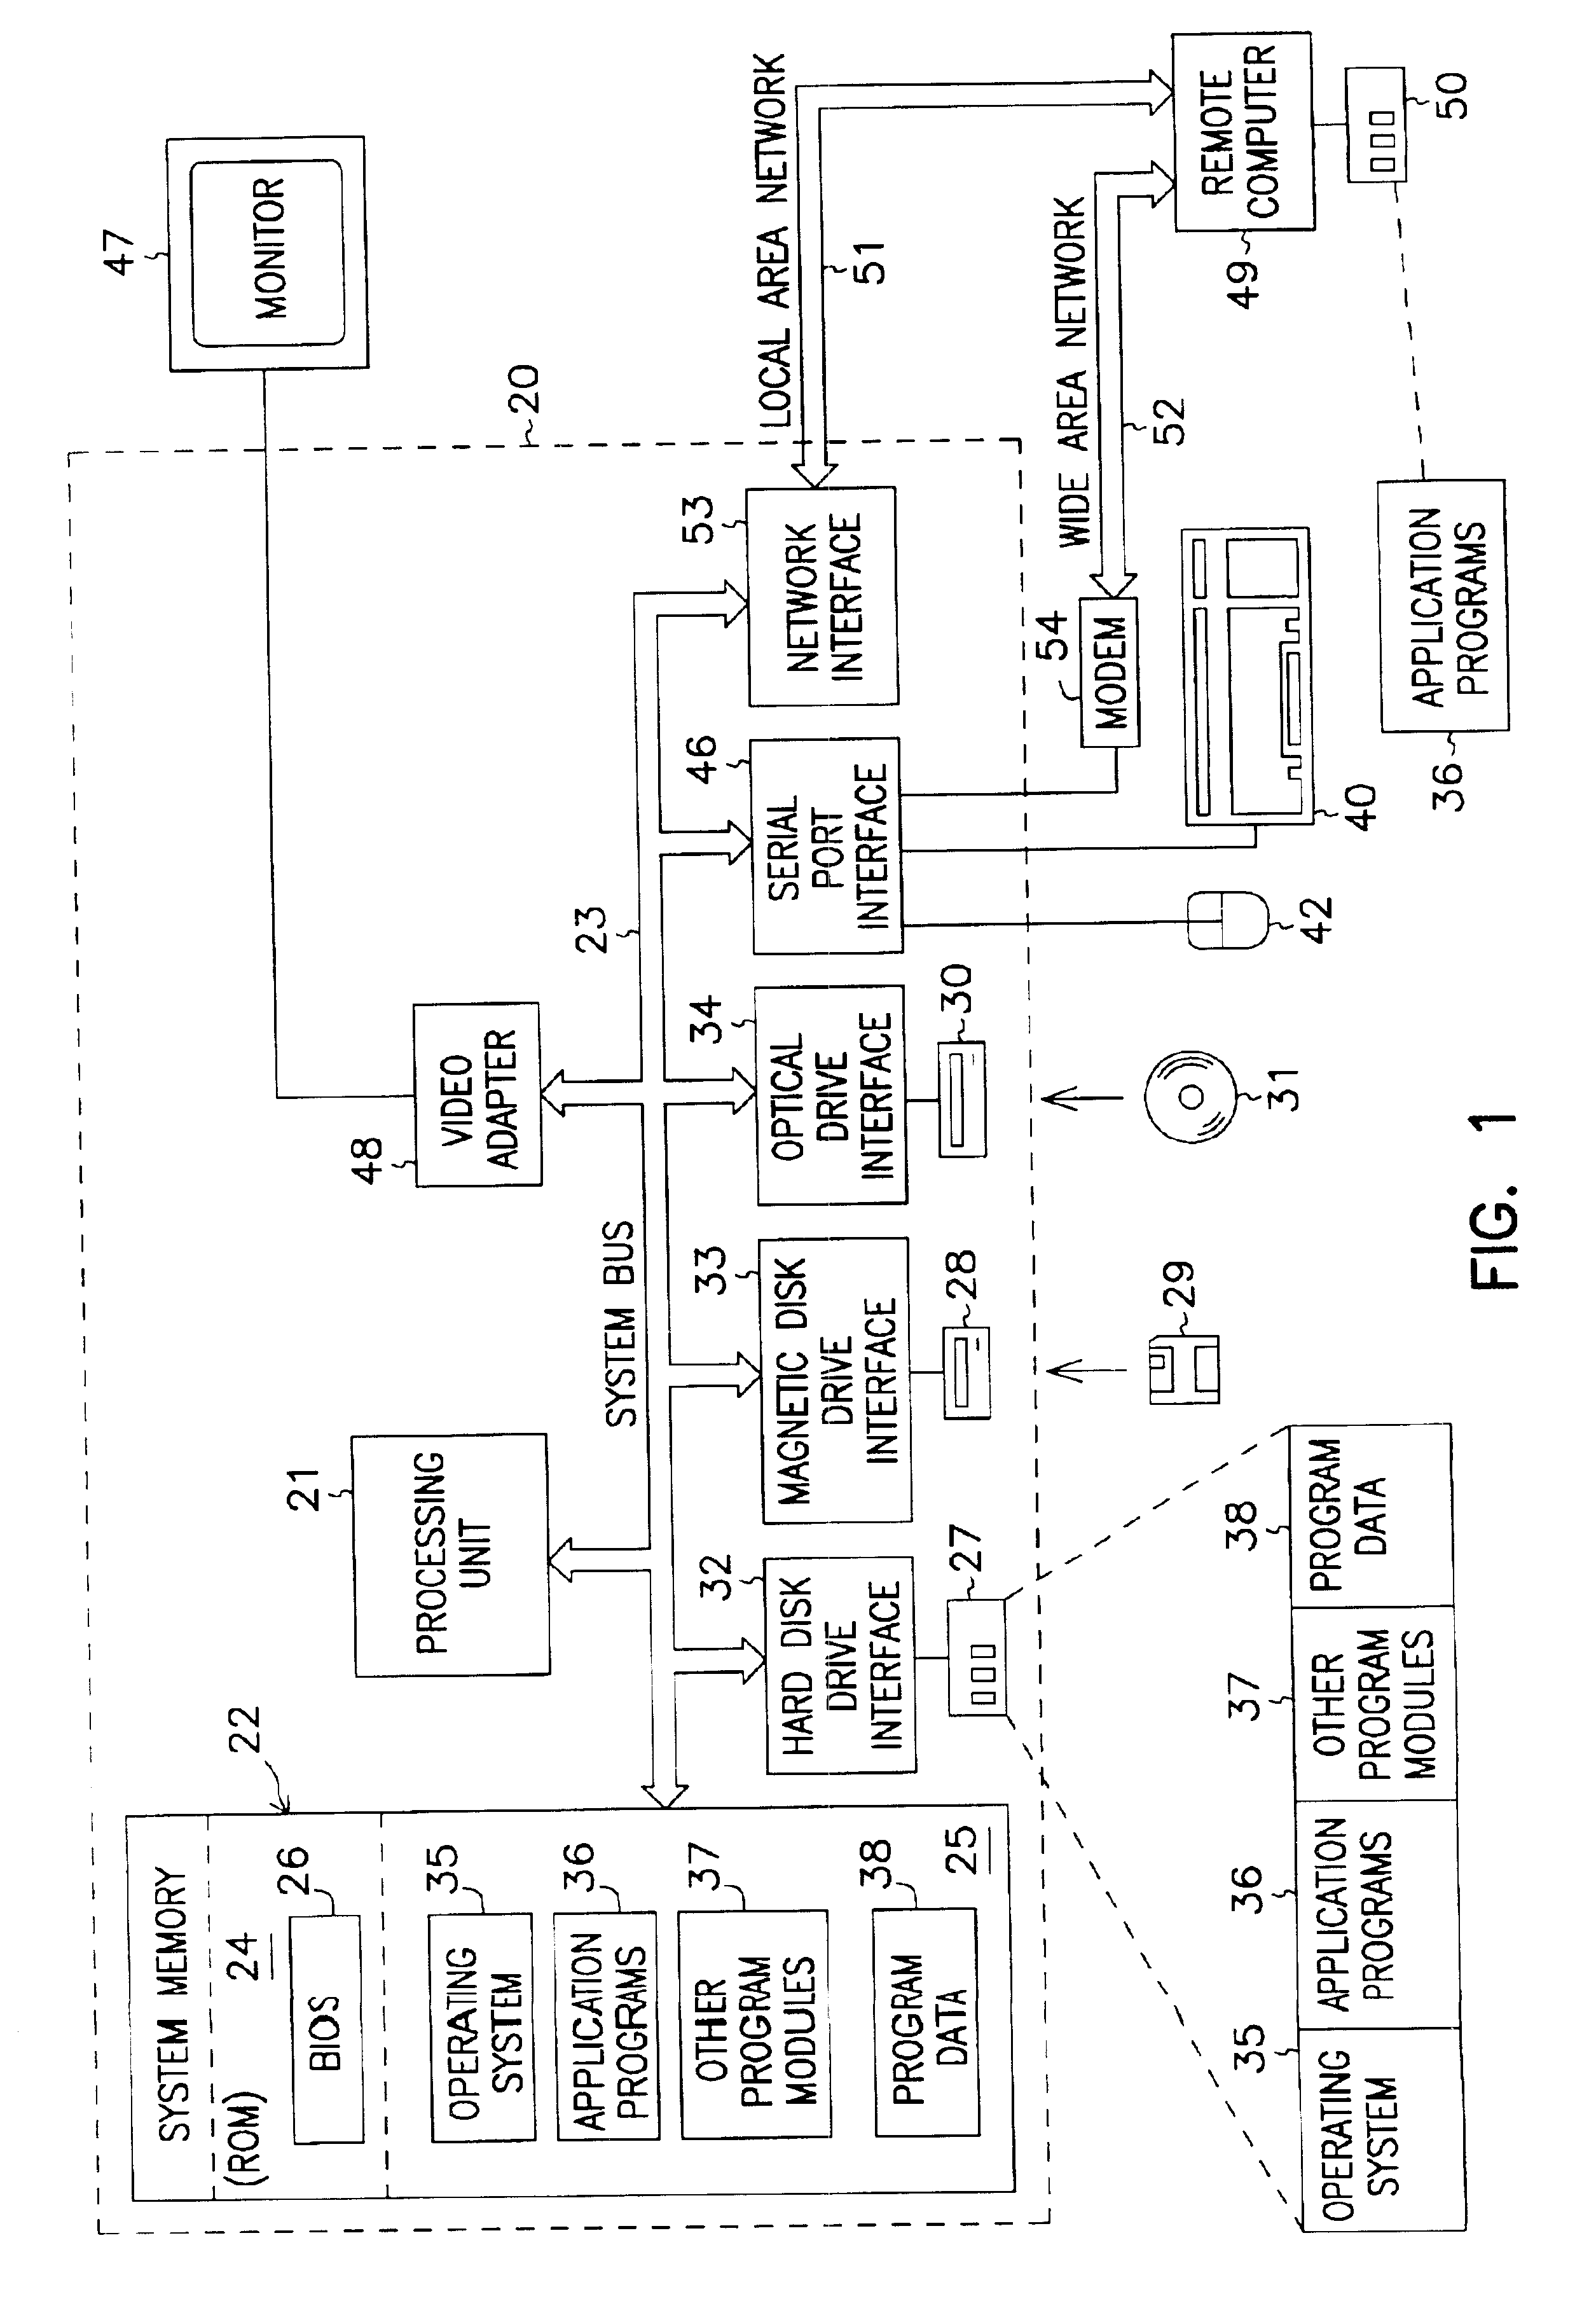 Systems and methods for insuring data over the internet